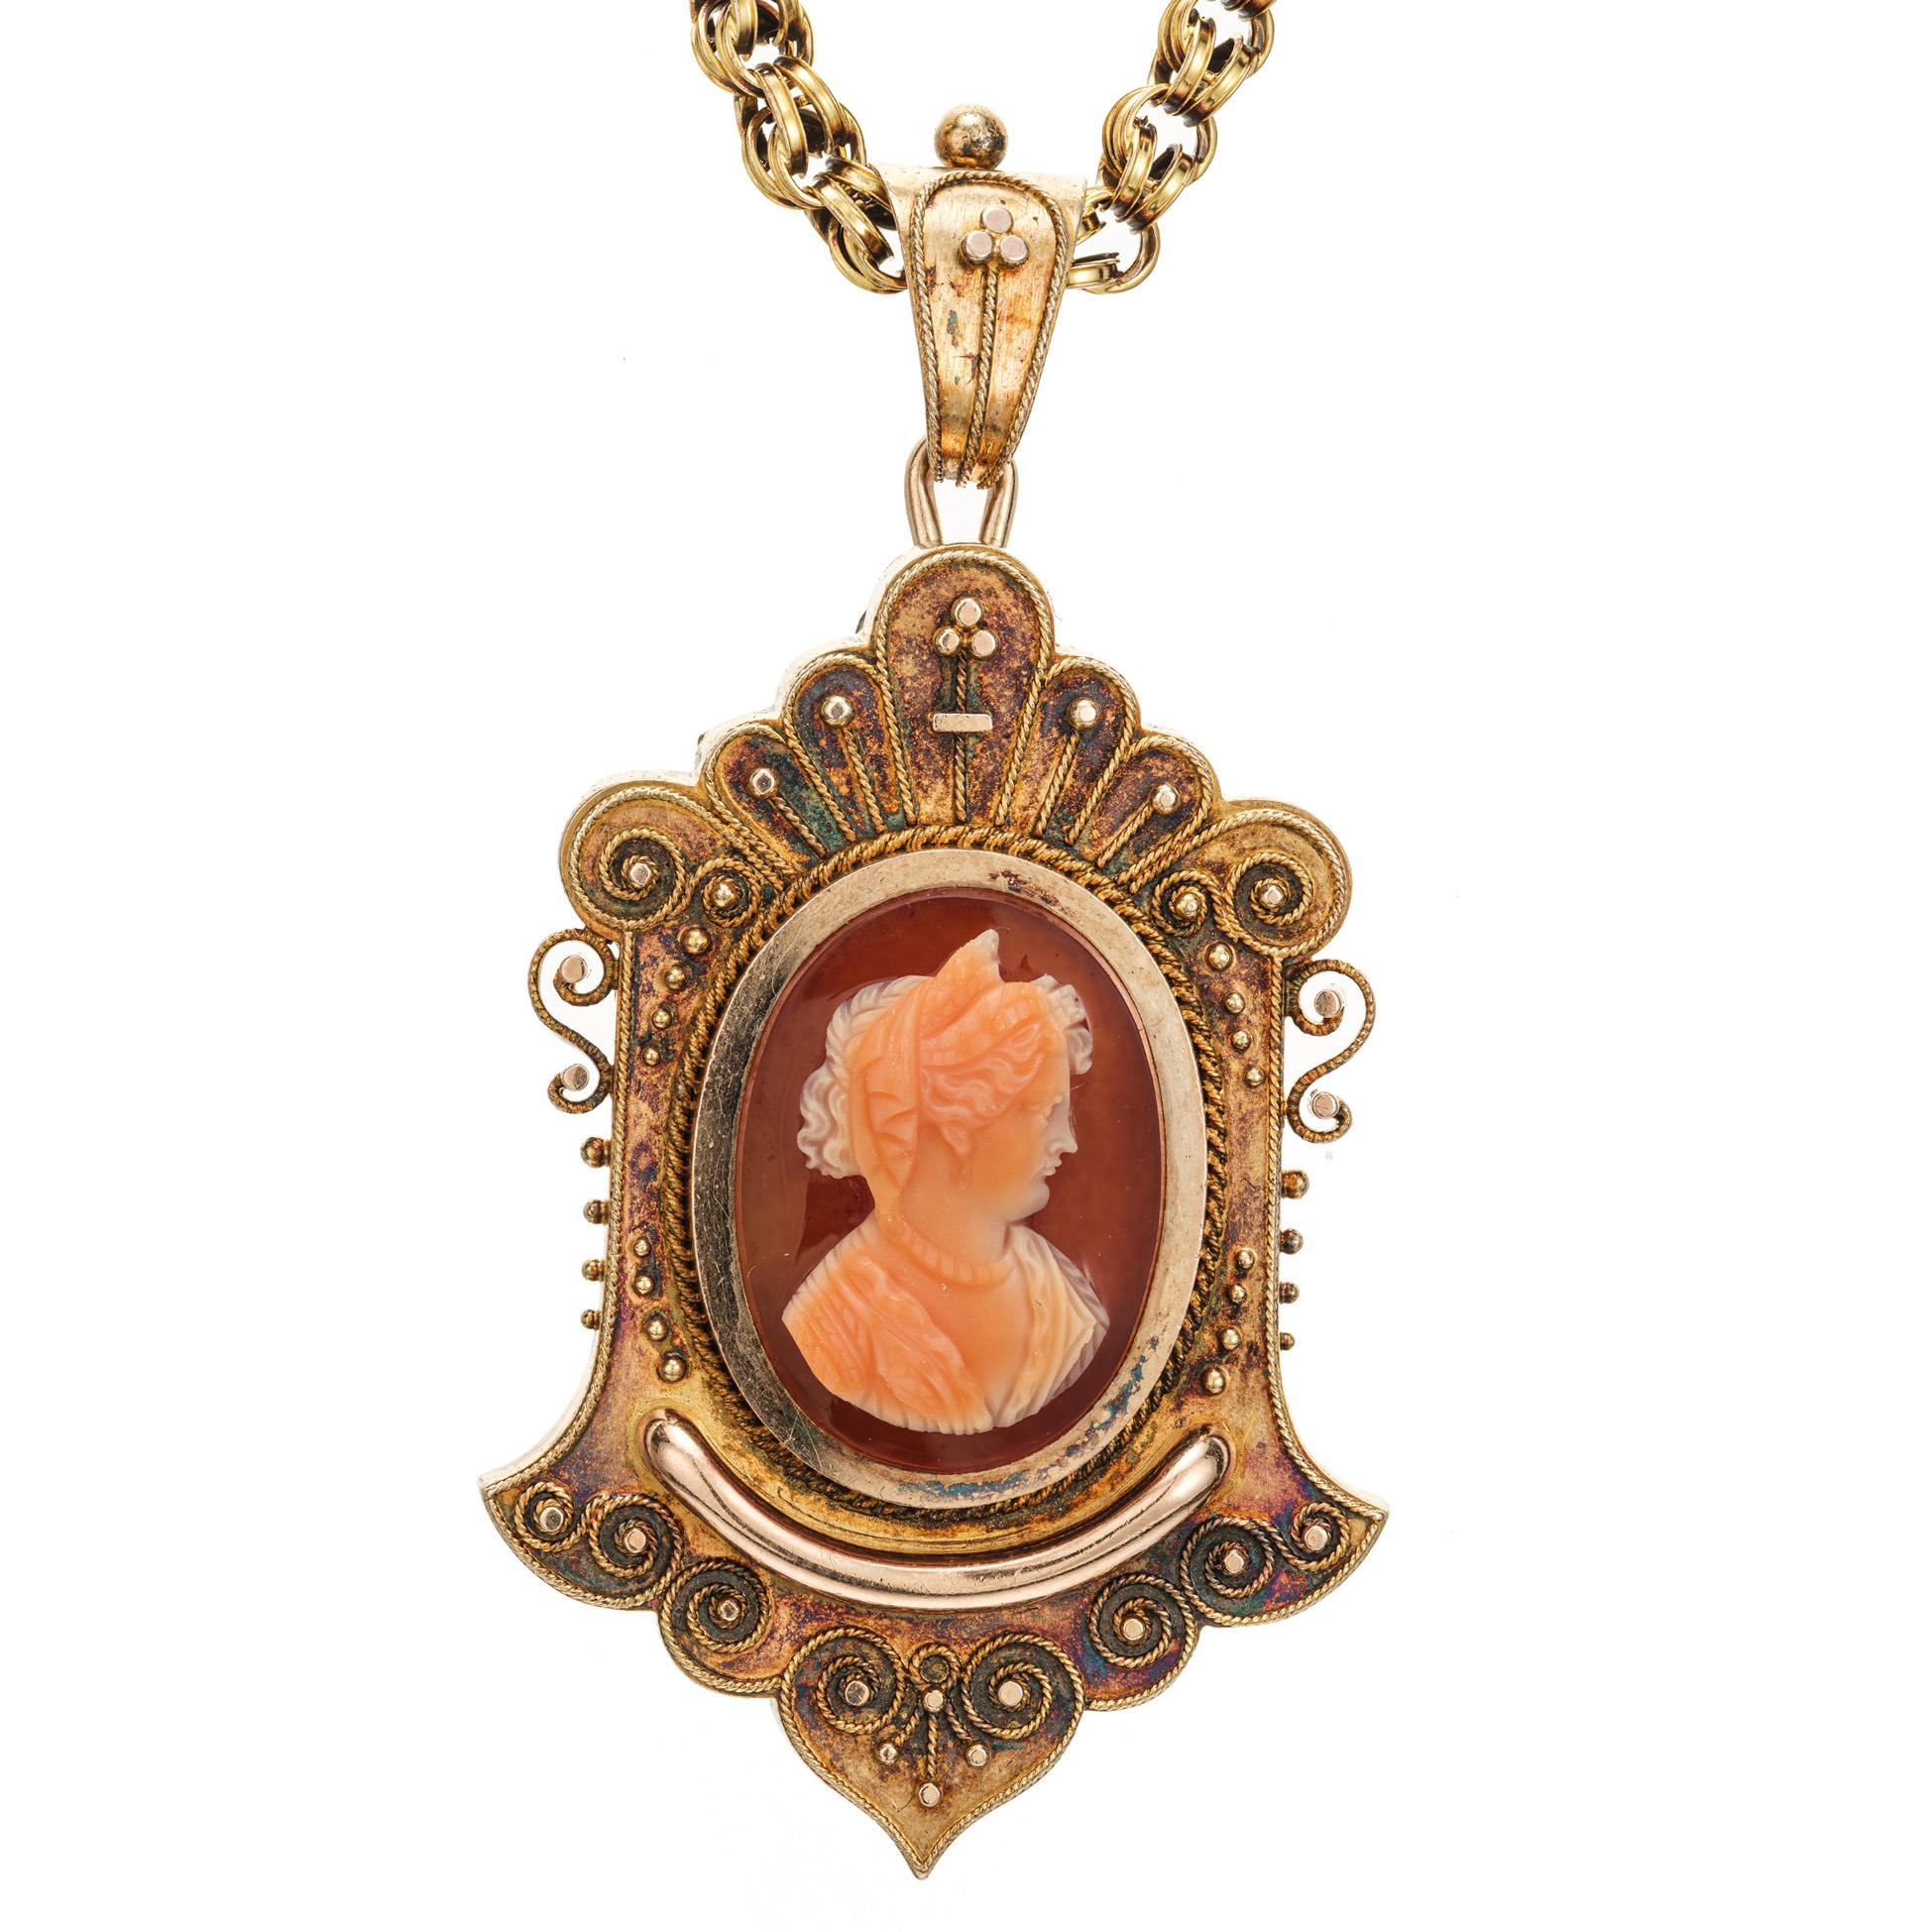 Original handmade Victorian carnelian carved cameo brooch pendant with natural patina and delicate granulation work. The 22 inch chain is also handmade and original. The back of the brooch has a glass frame for a picture. The glass is original to